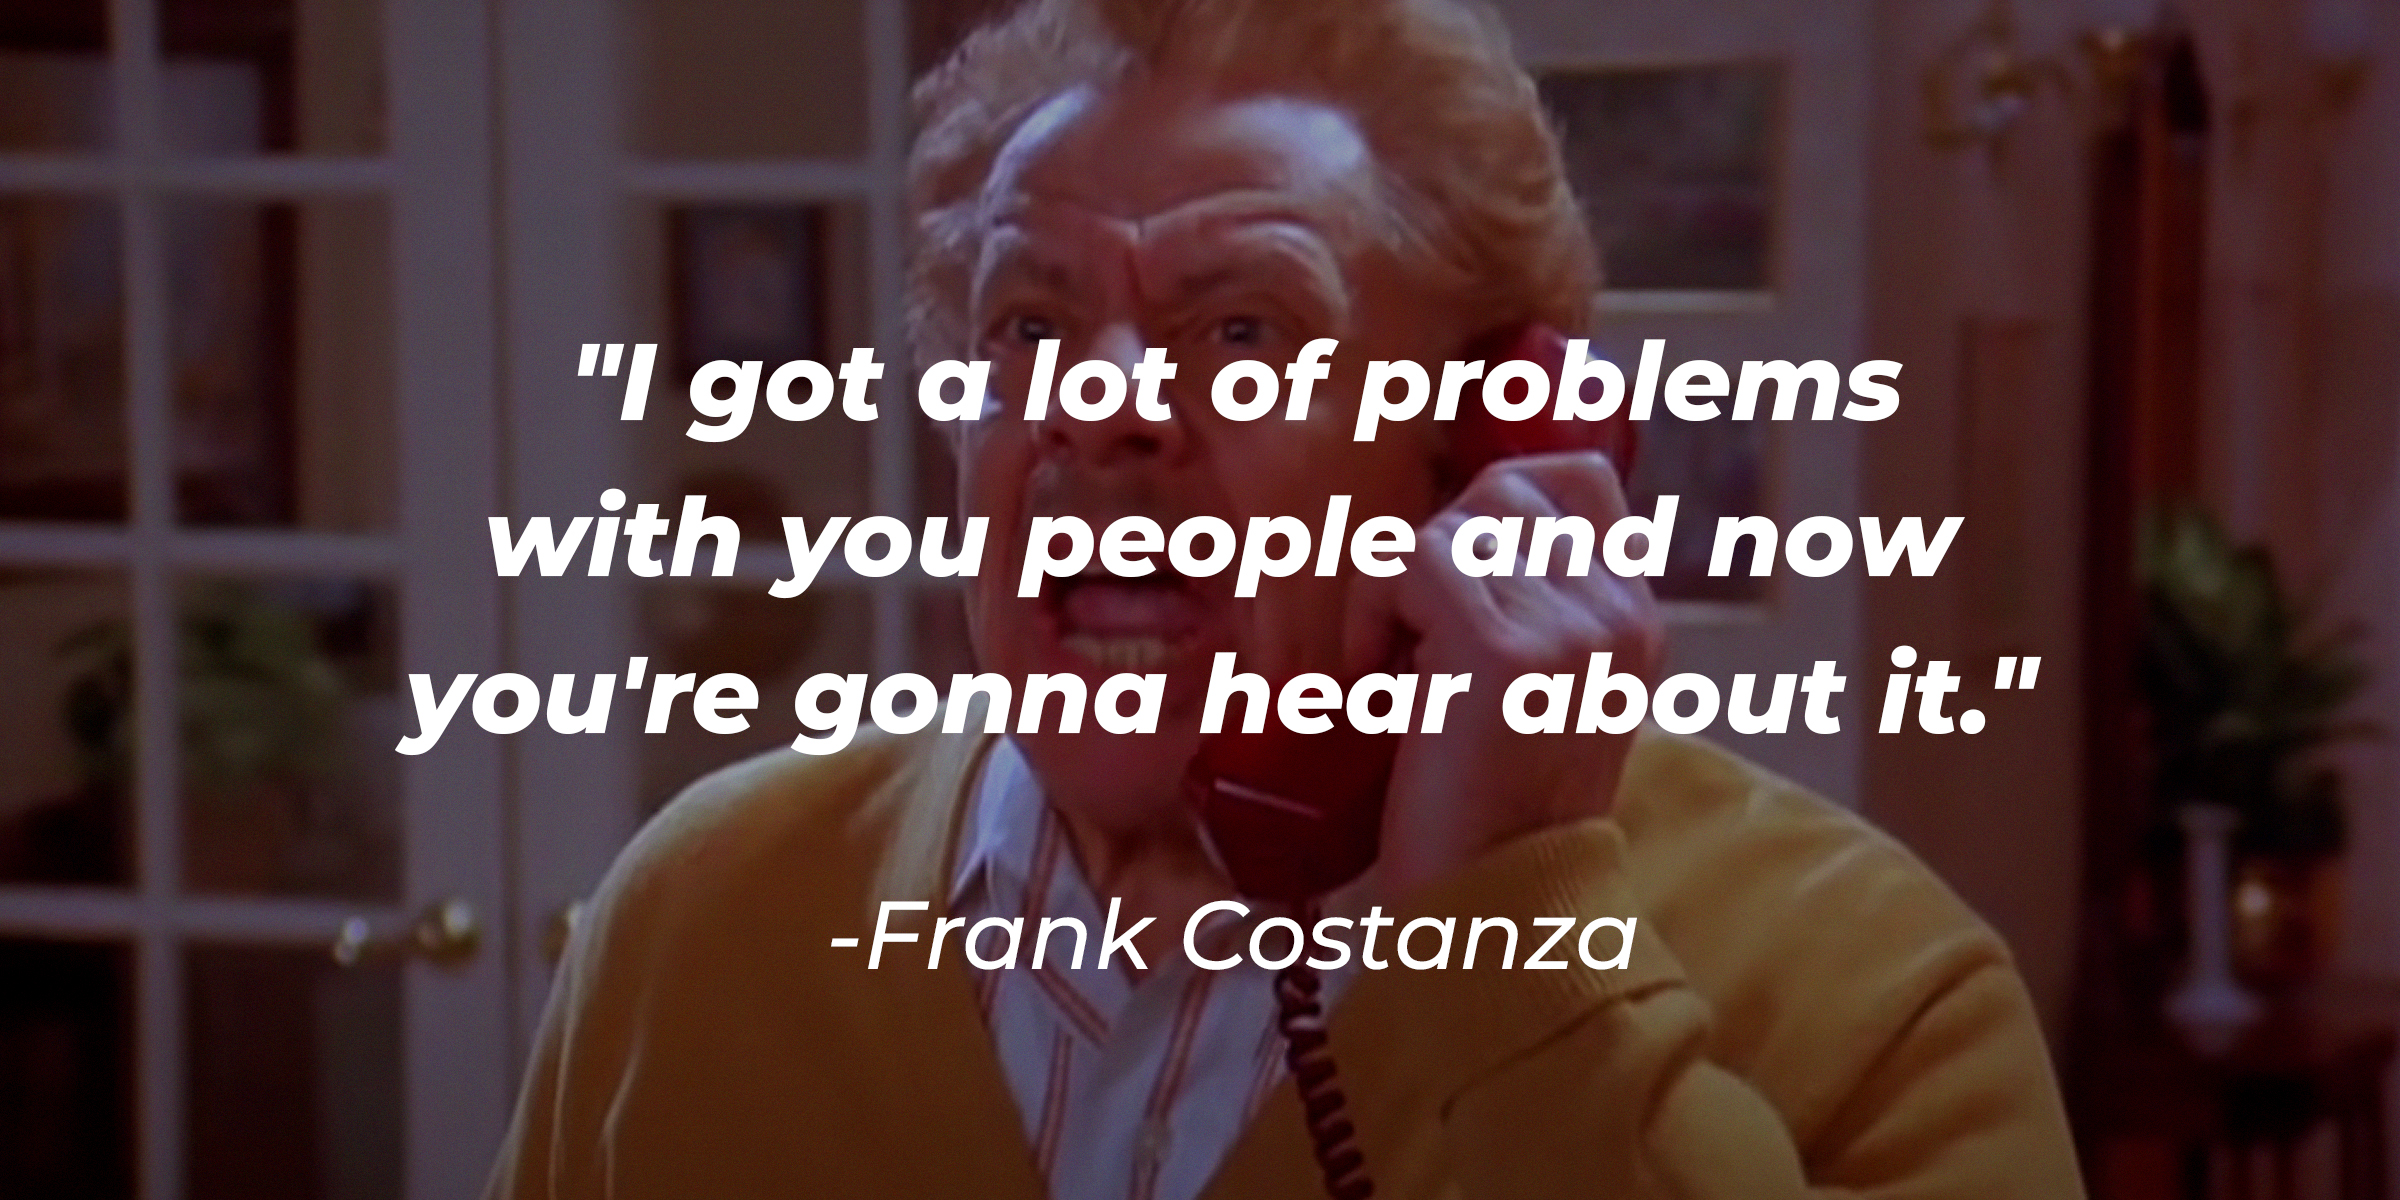 Frank Costanza with His Quote, “I Got a Lot of Problems with You People and Now You’re Gonna Hear About It.” | Source: Facebook/Seinfeld